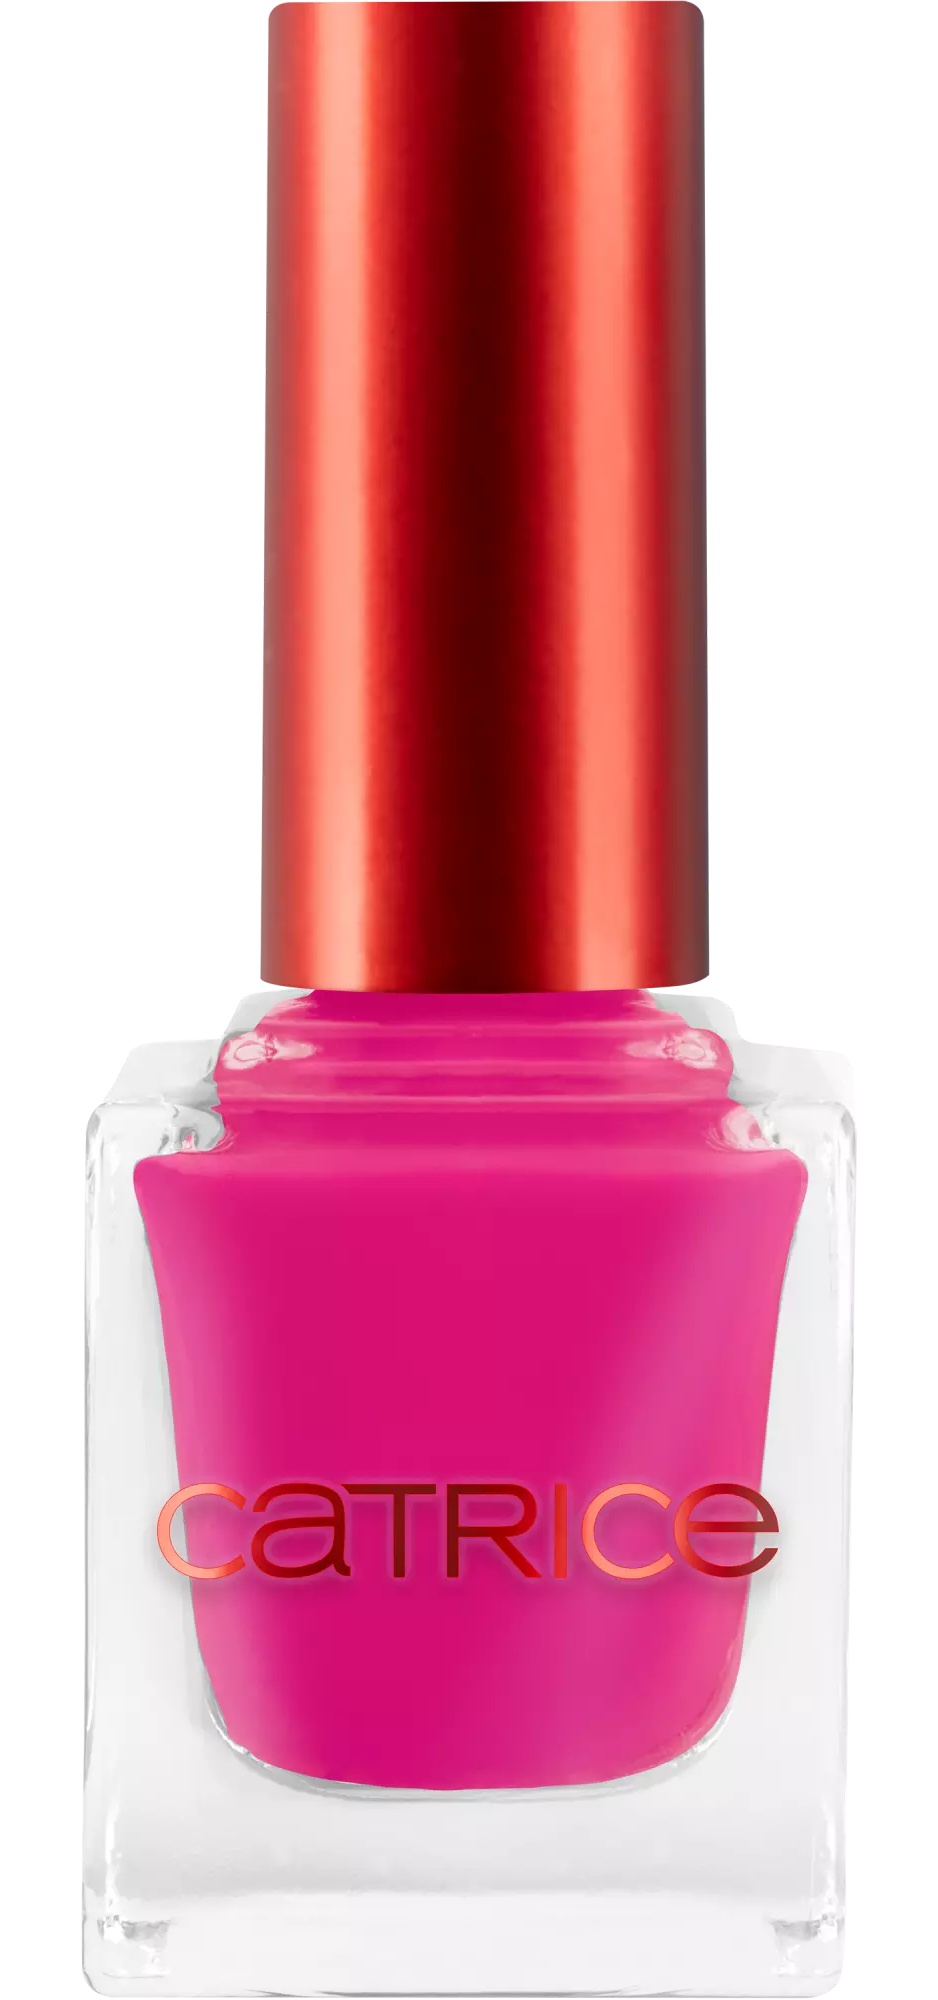 Catrice Heart Affair Nail Lacquer No One’s Lover